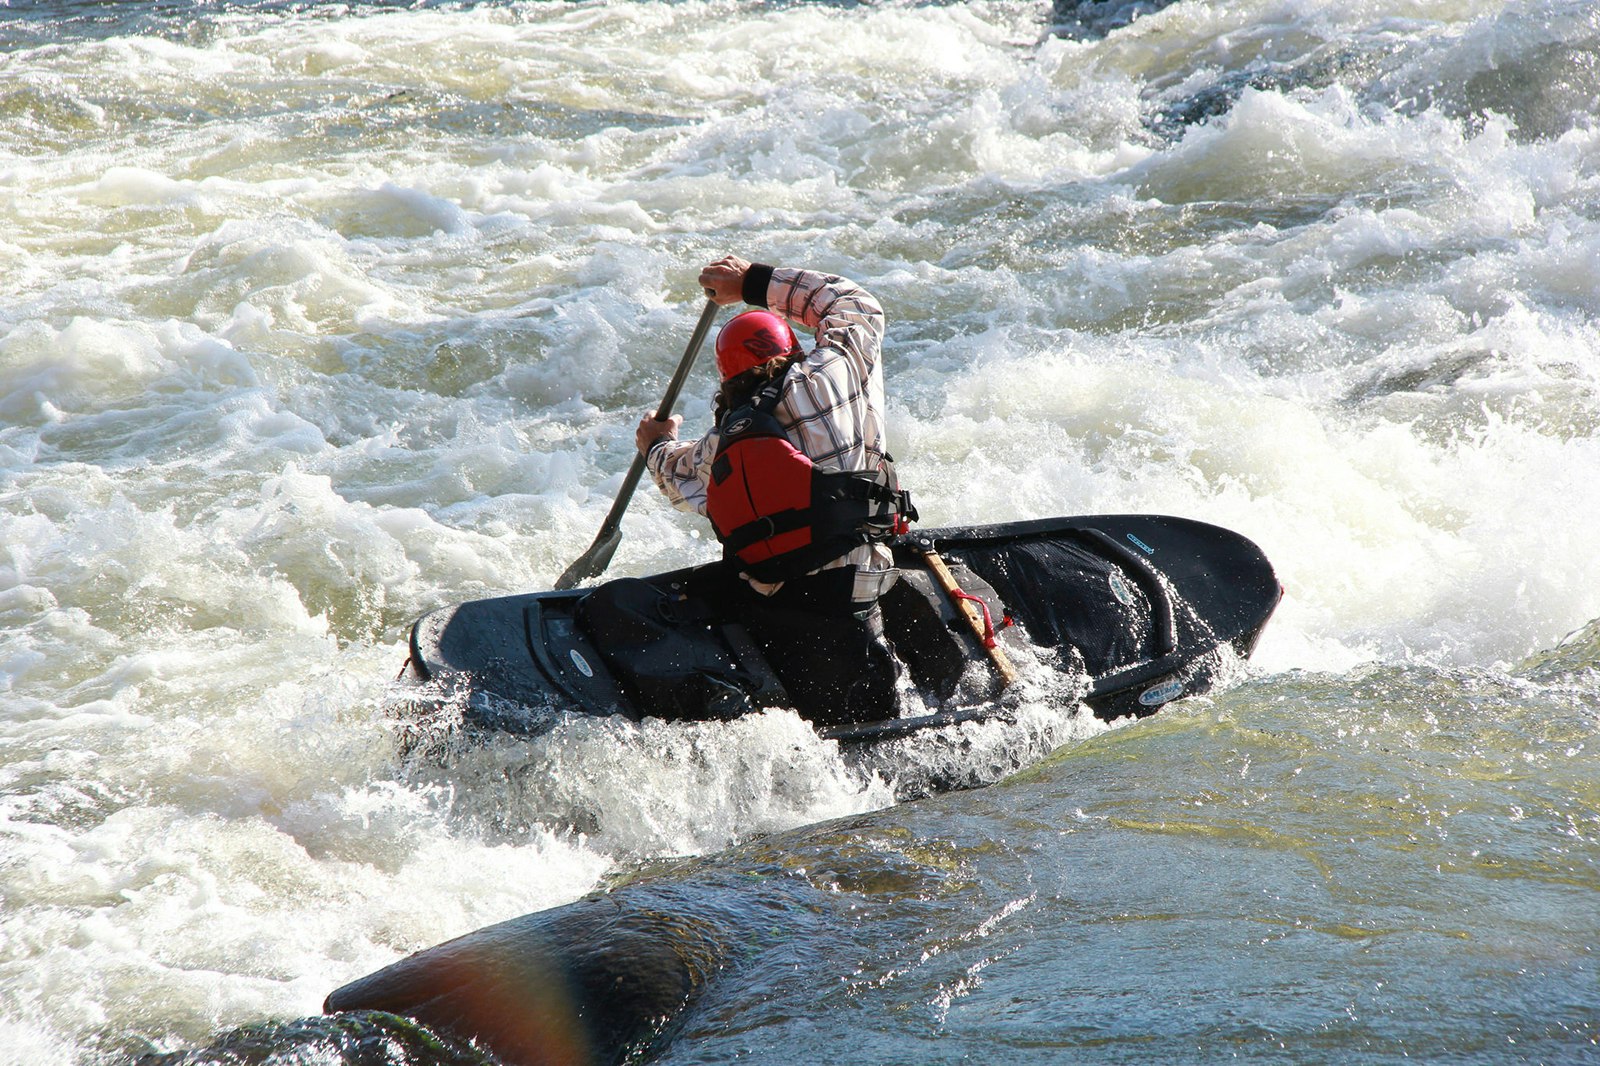 kayaker fights rapids on the James River in Virginia